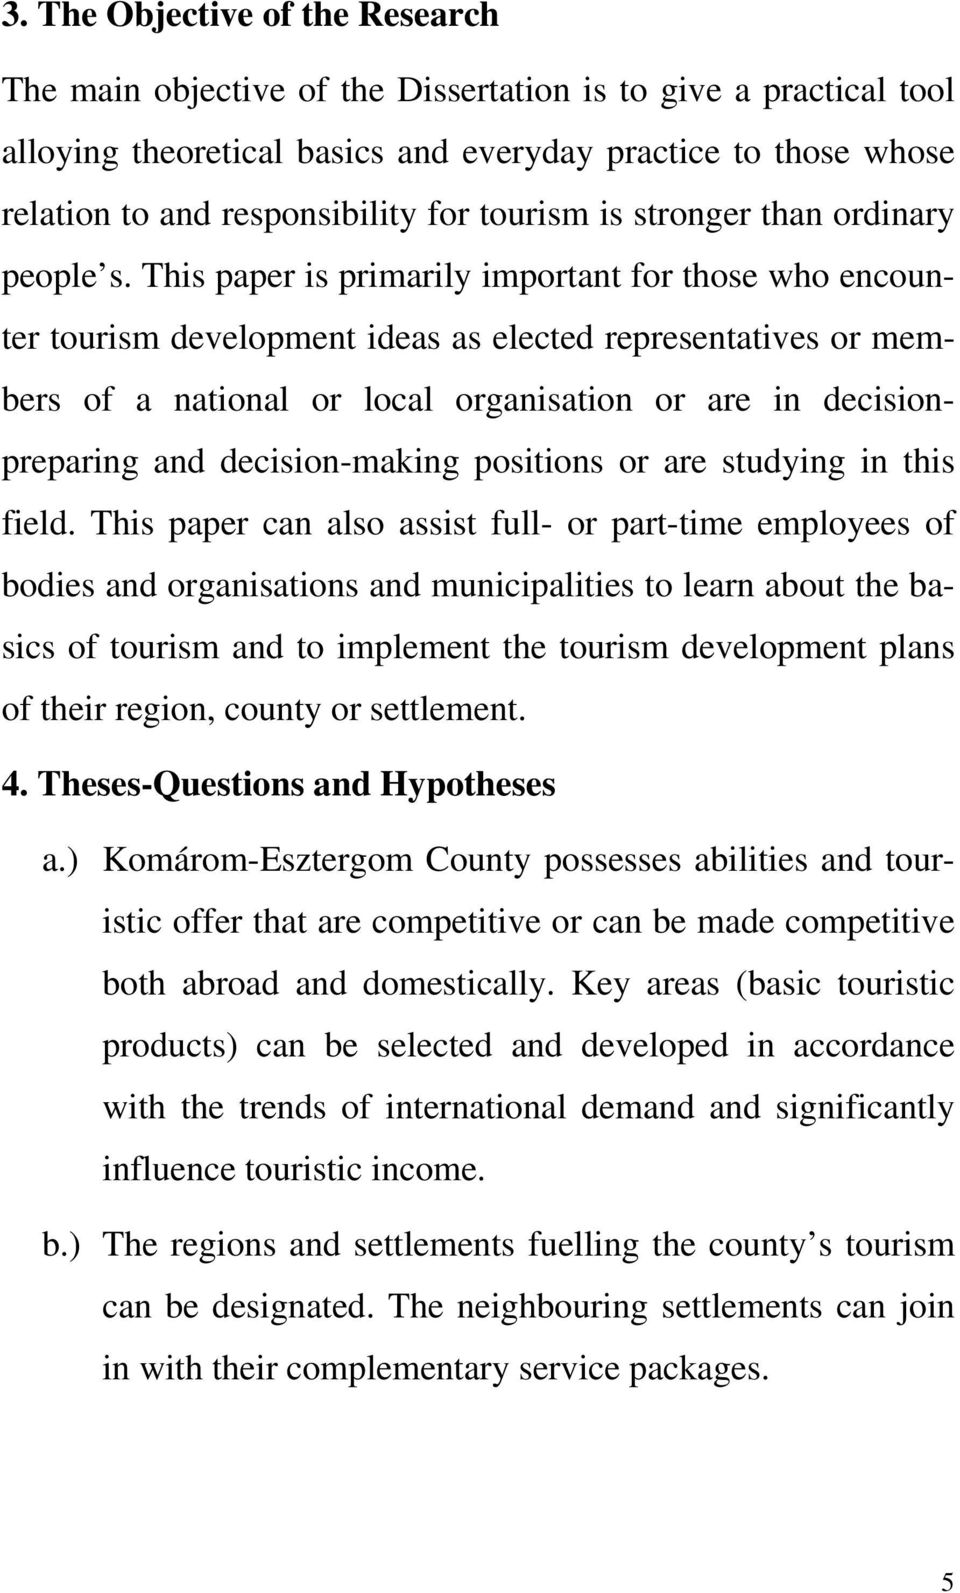 This paper is primarily important for those who encounter tourism development ideas as elected representatives or members of a national or local organisation or are in decisionpreparing and